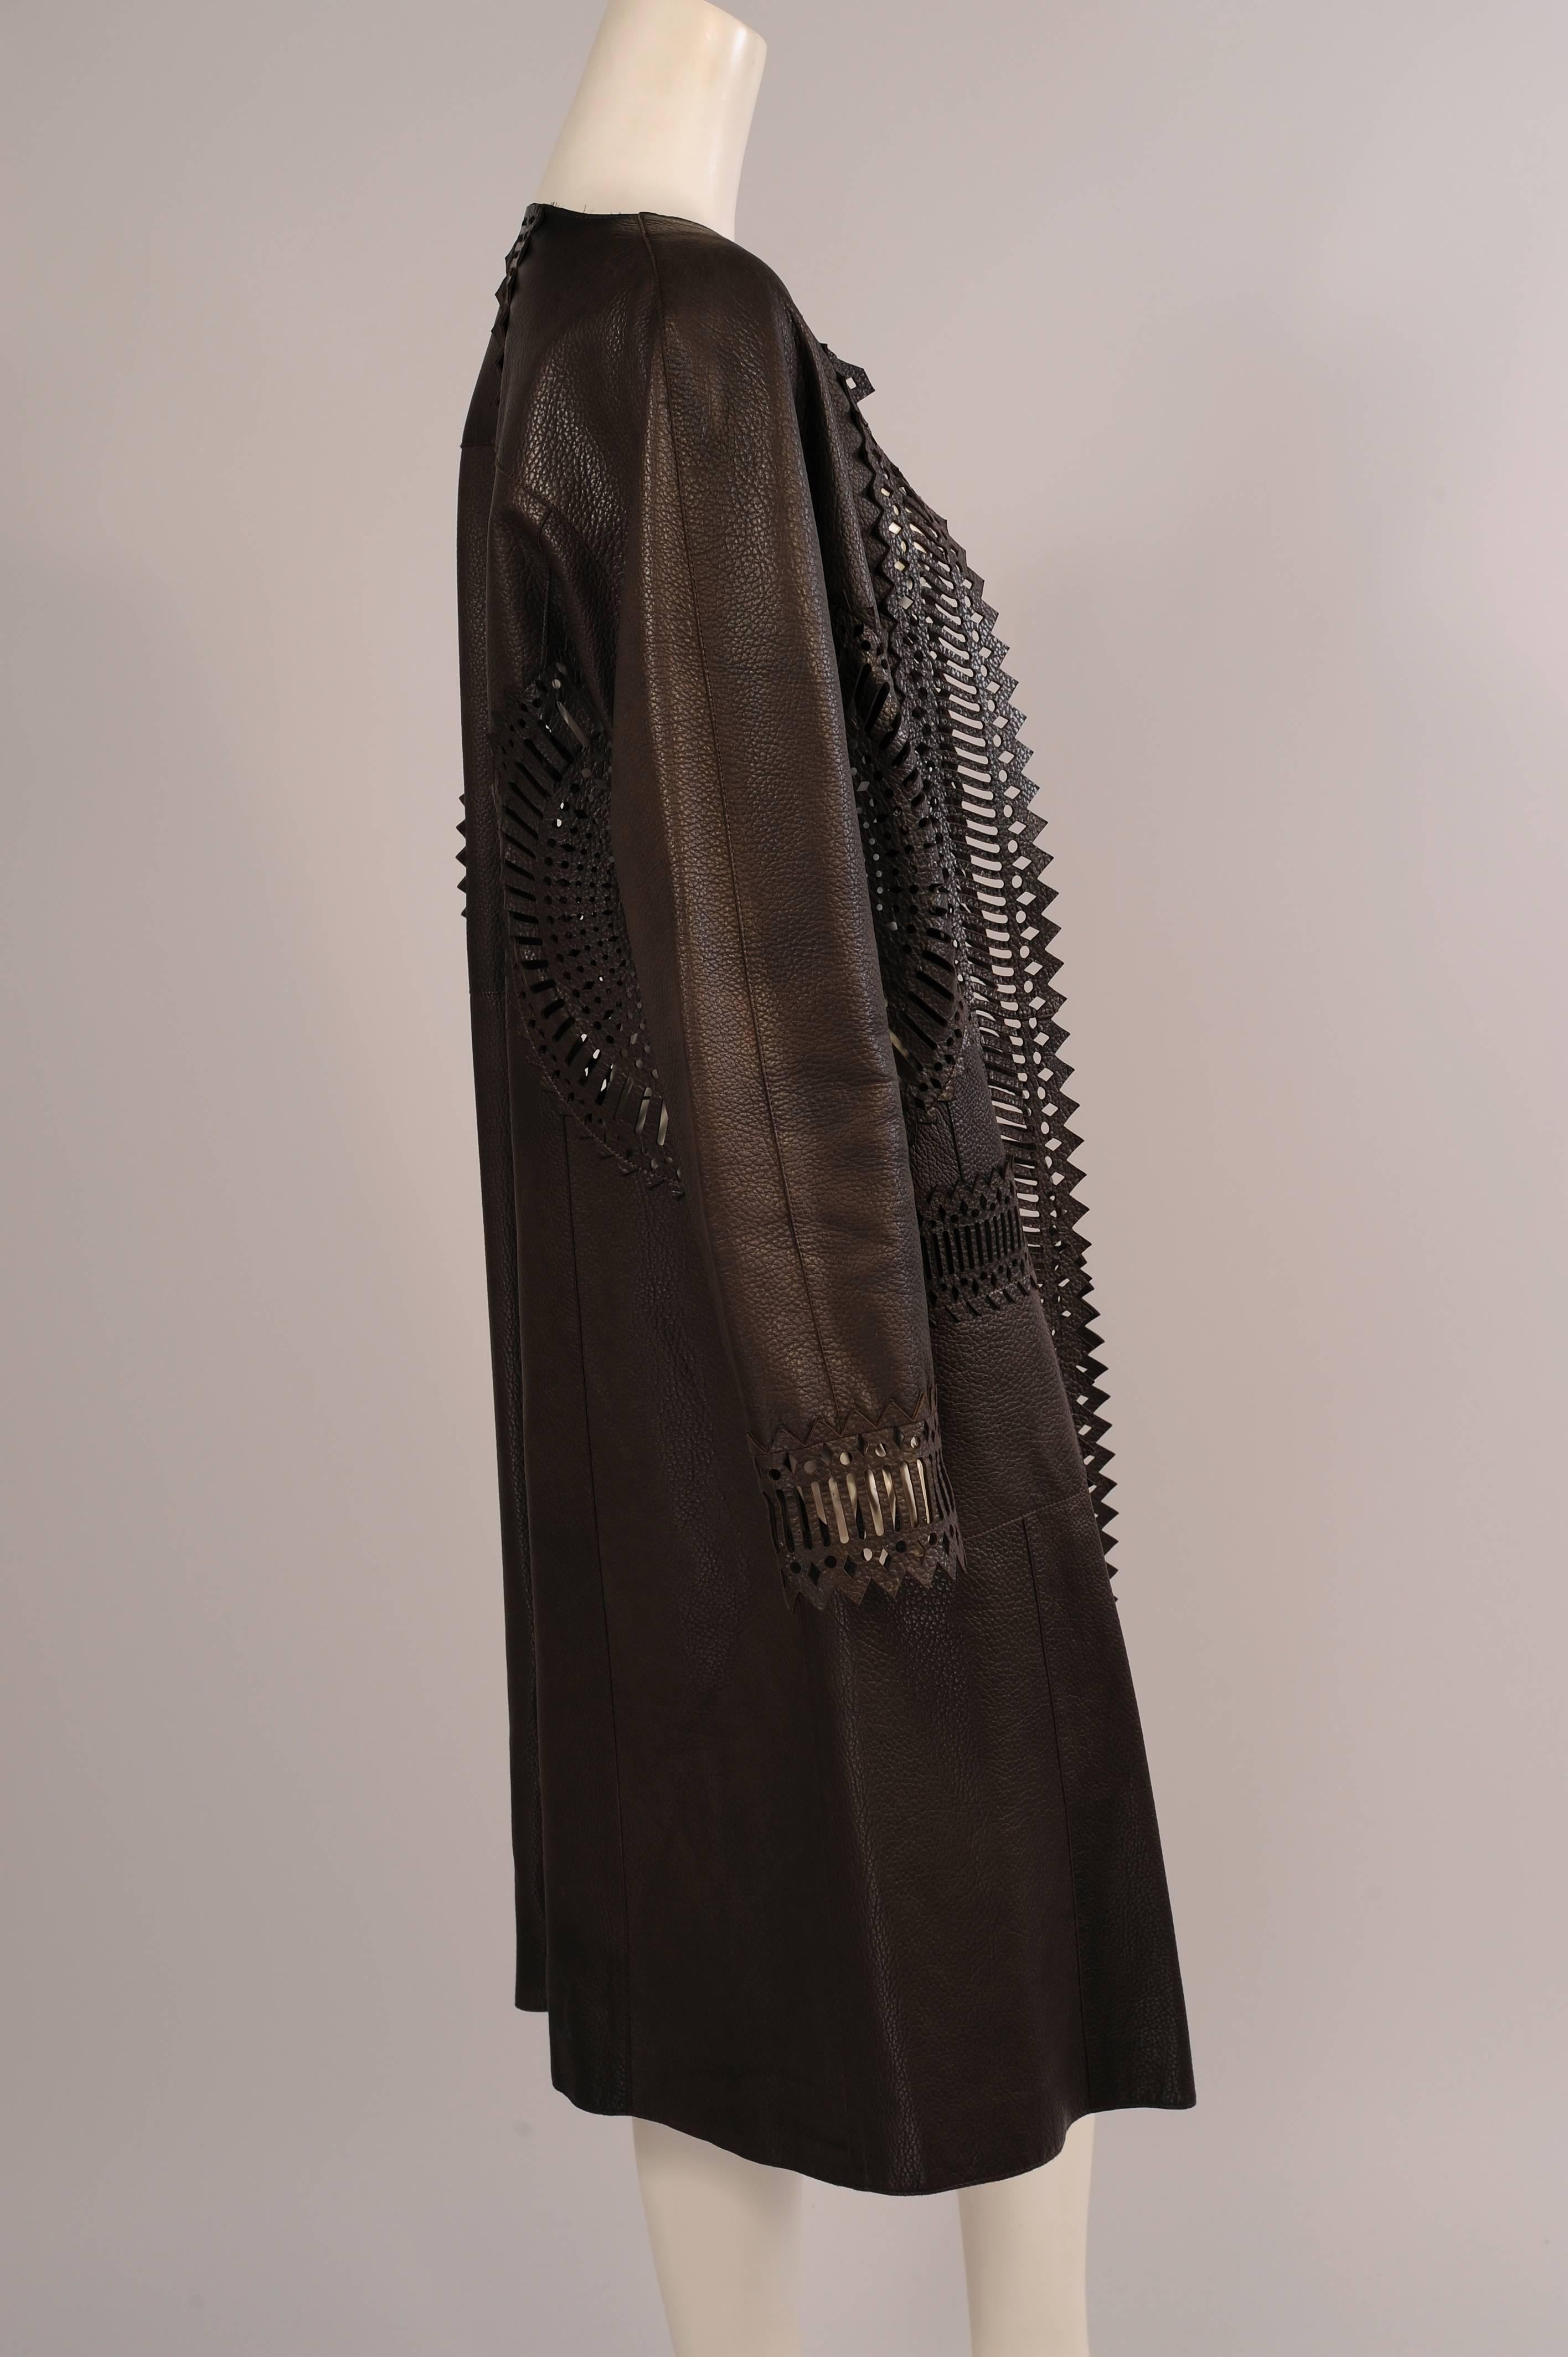 Gianfranco Ferre Chocolate Brown Supple Leather Coat with Pierced Decoration  In Excellent Condition In New Hope, PA